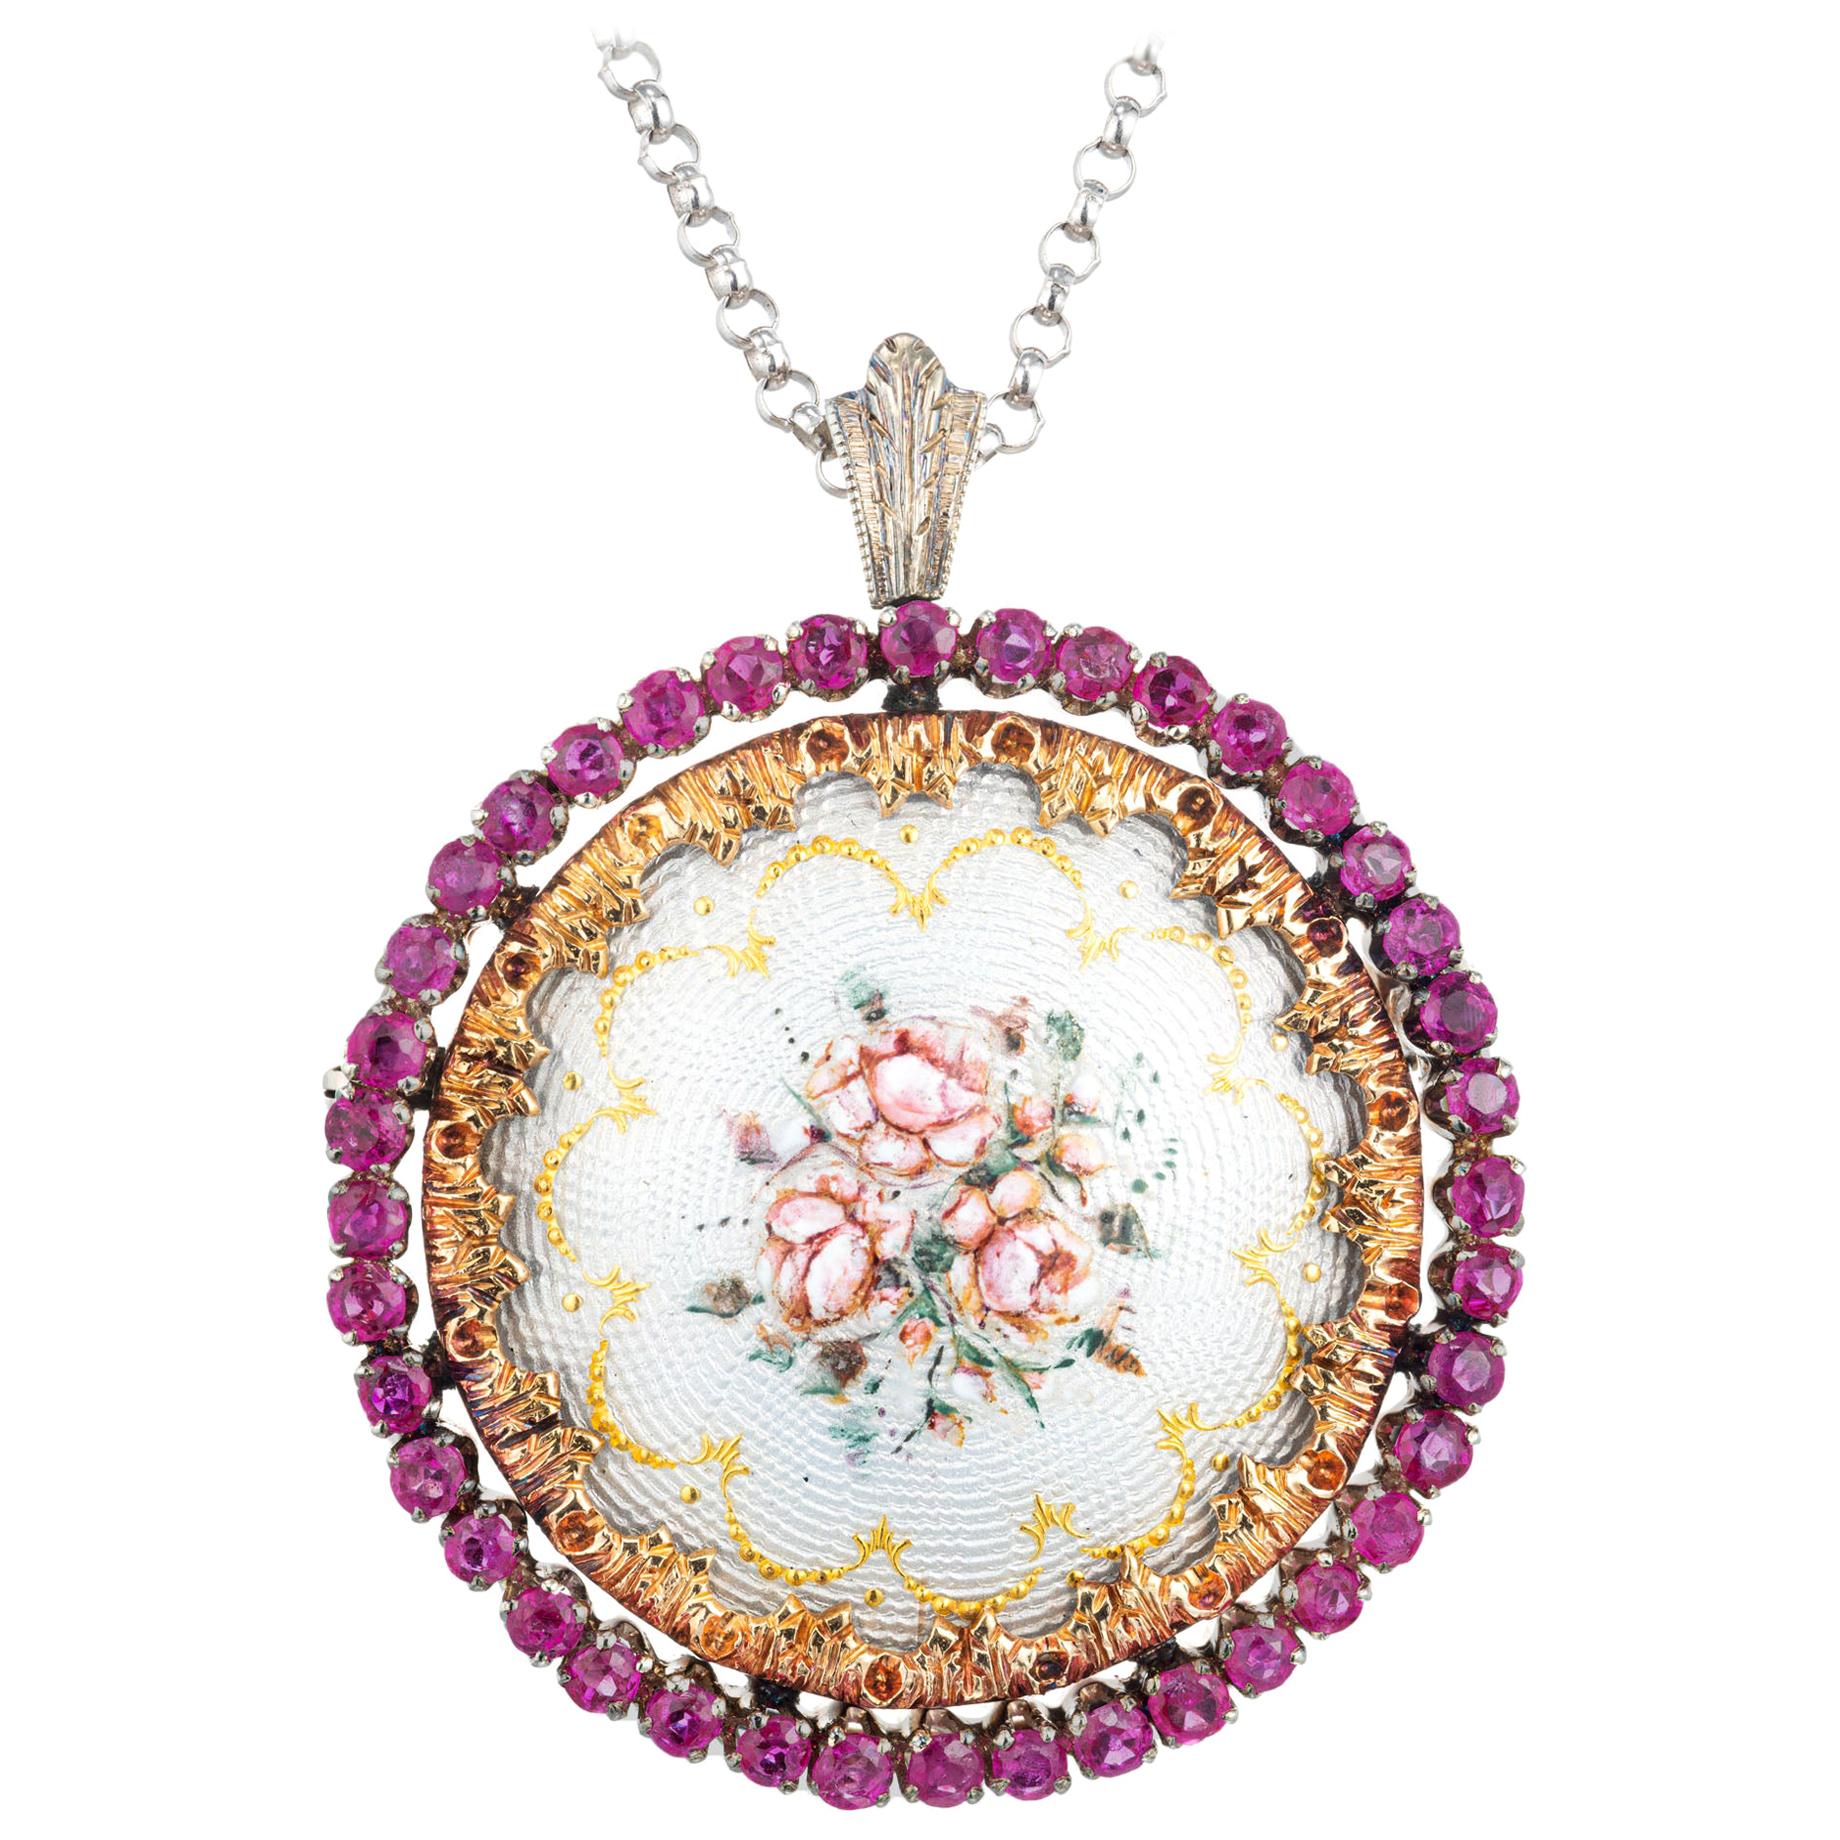 1.75 Carat Ruby Two-Tone Gold Flower Enamel Circle Brooch Pendant Necklace